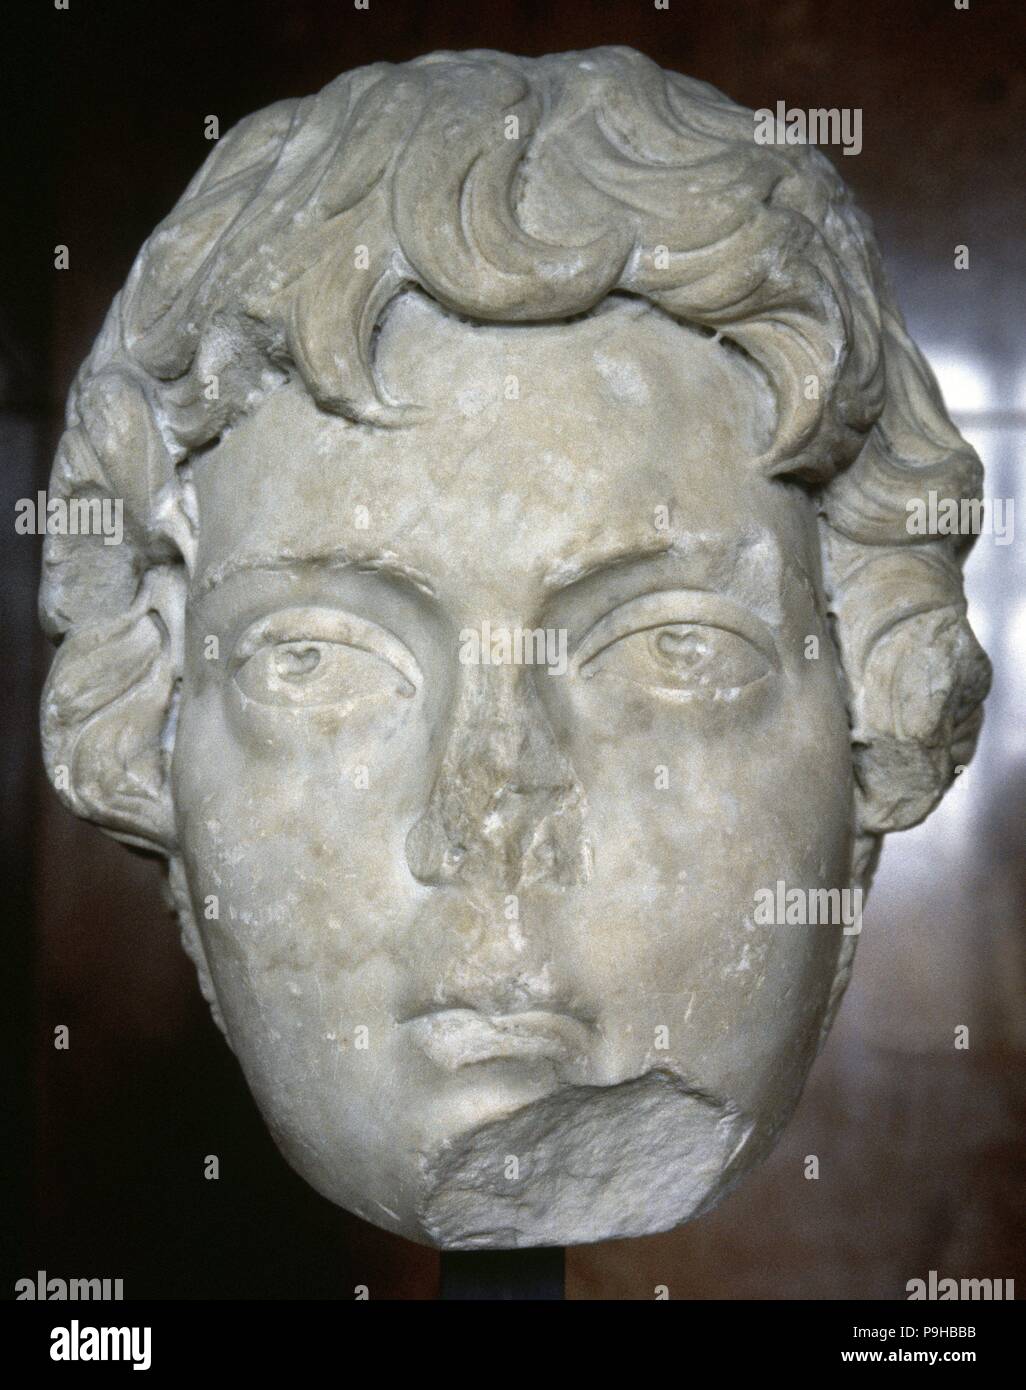 Caracalla (Lugdunum, 188-Mesoporamia, 217 AD). known as Antoninus. Roman Emperor from 198-217 AD. Severan Dynasty. Marble bust from Markouna, Argelia. 3rd century AD. Louvre Museum. Paris, France. Stock Photo